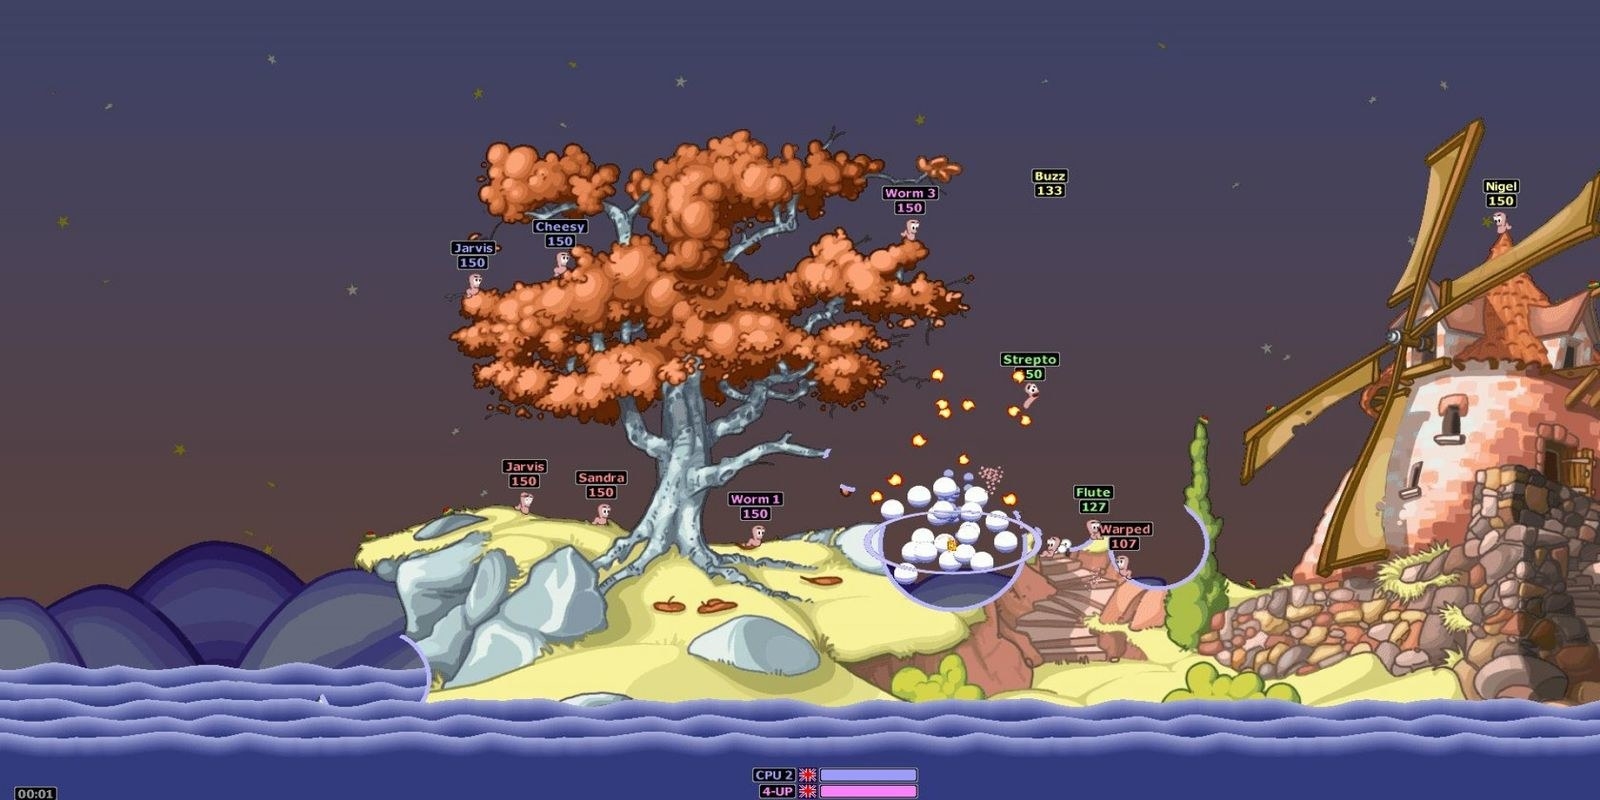 Gameplay of worms battling on a classic 2D map